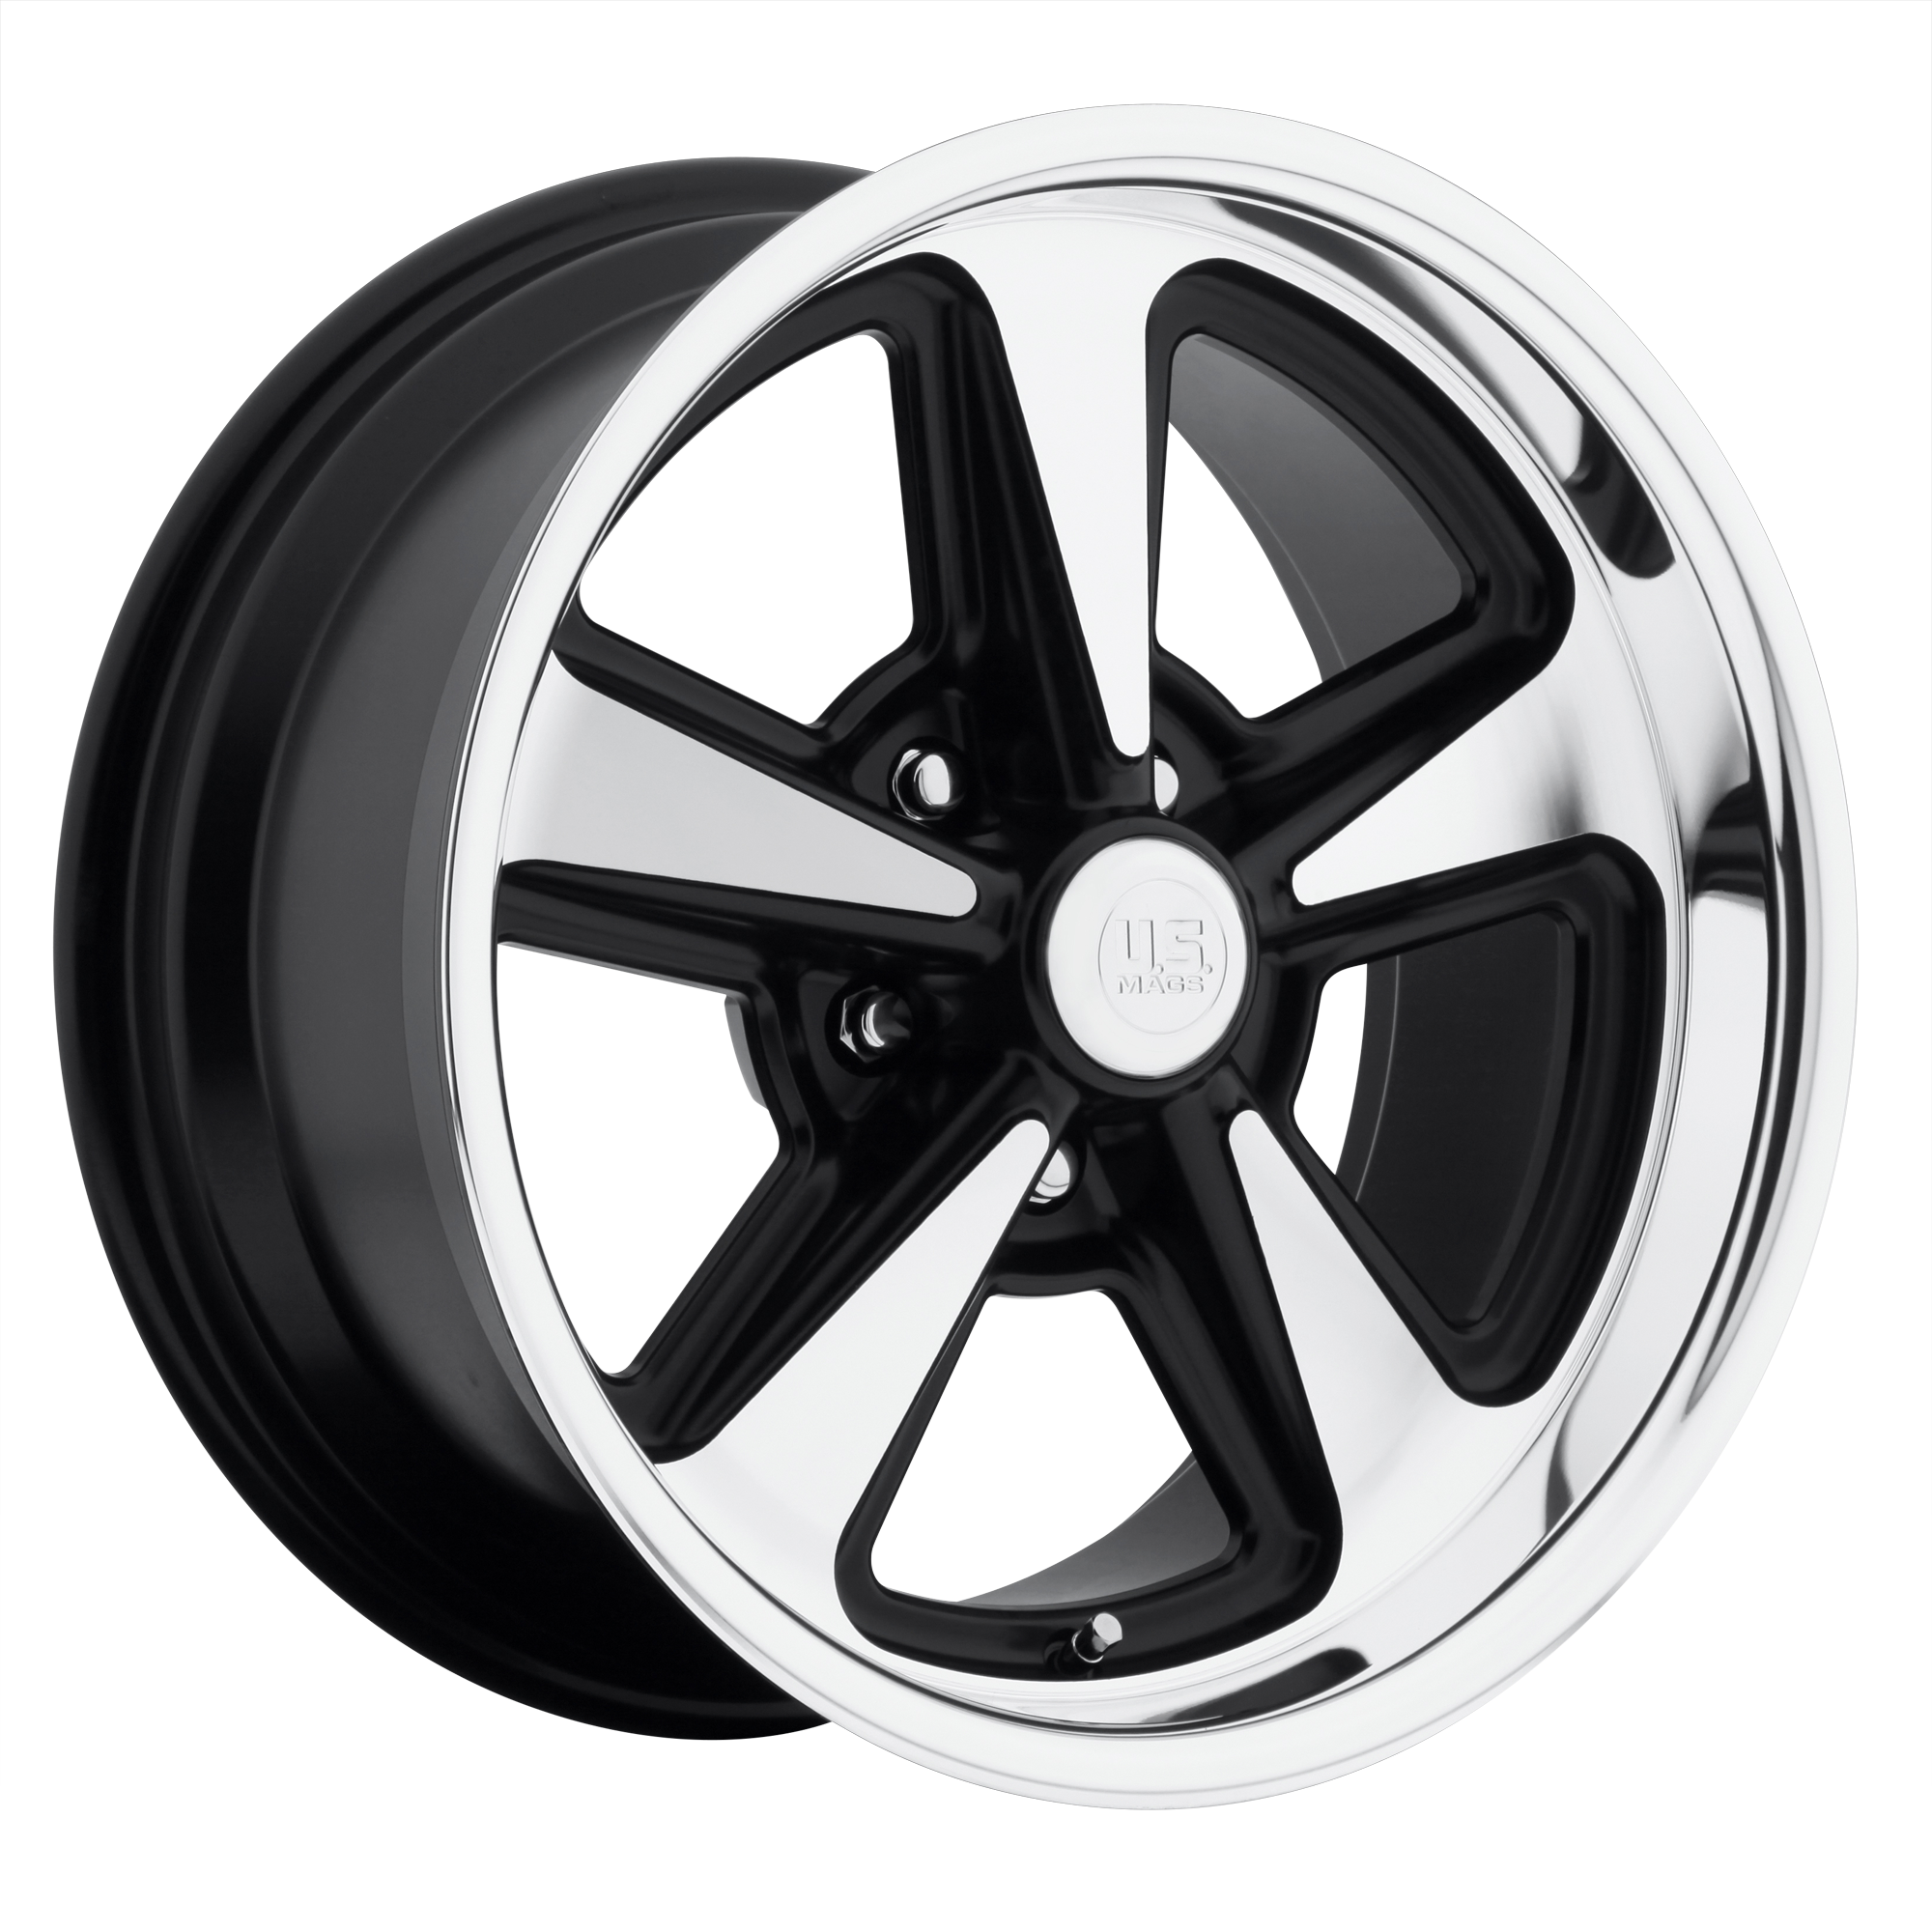 BANDIT 18x9 5x114.30 MATTE BLACK MACHINED (8 mm) - Tires and Engine Performance